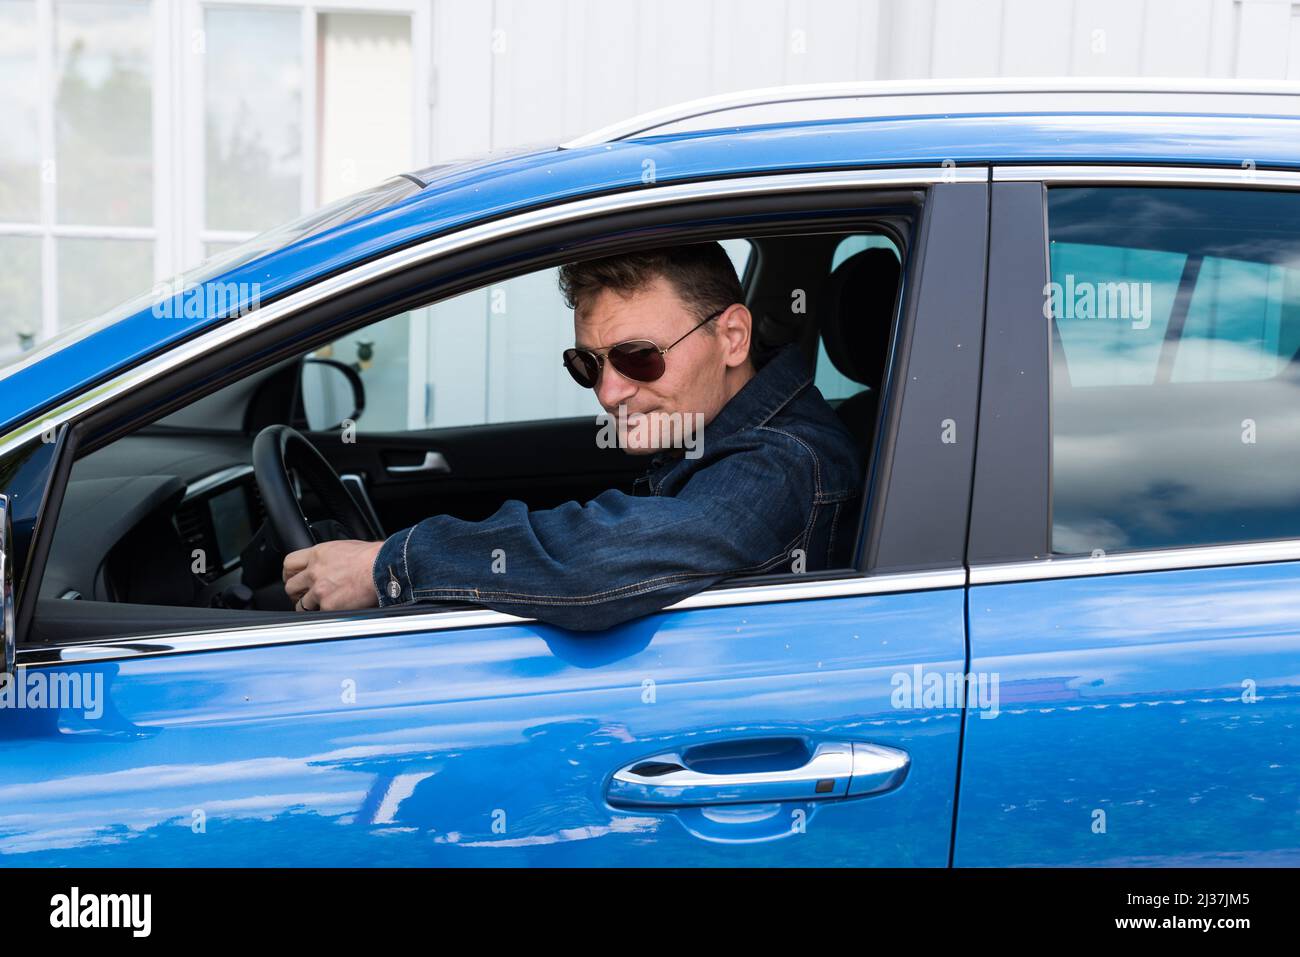 Oregrund, Uppland - Sweden - 30 07 2019- Fourty year old fashionable man with sunglasses posing in his blue Kia Sportage car. Stock Photo